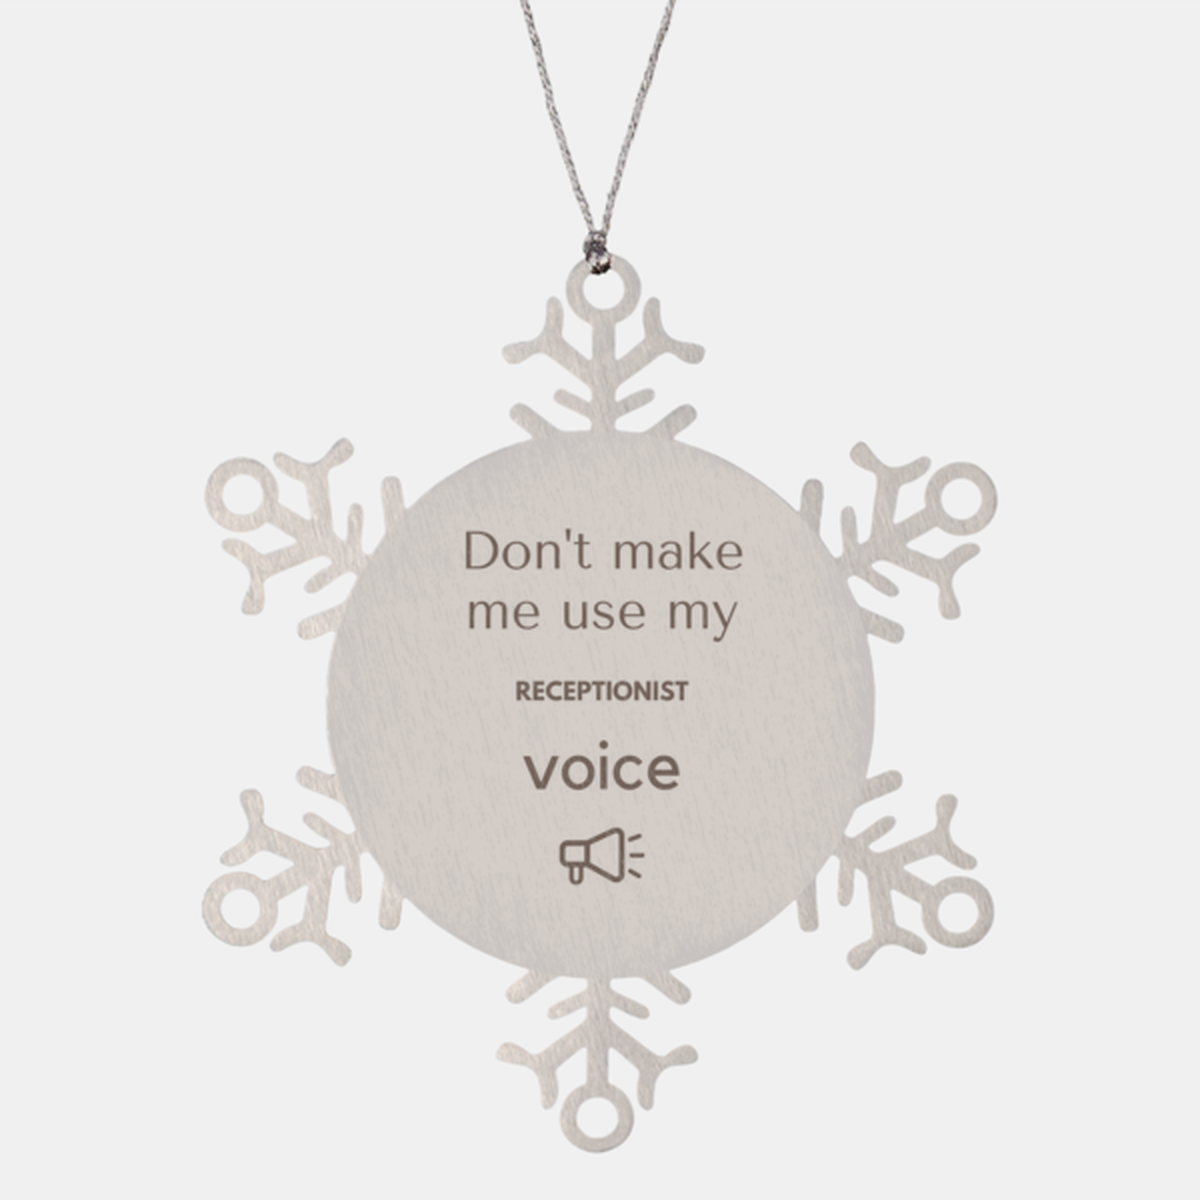 Don't make me use my Receptionist voice, Sarcasm Receptionist Ornament Gifts, Christmas Receptionist Snowflake Ornament Unique Gifts For Receptionist Coworkers, Men, Women, Colleague, Friends